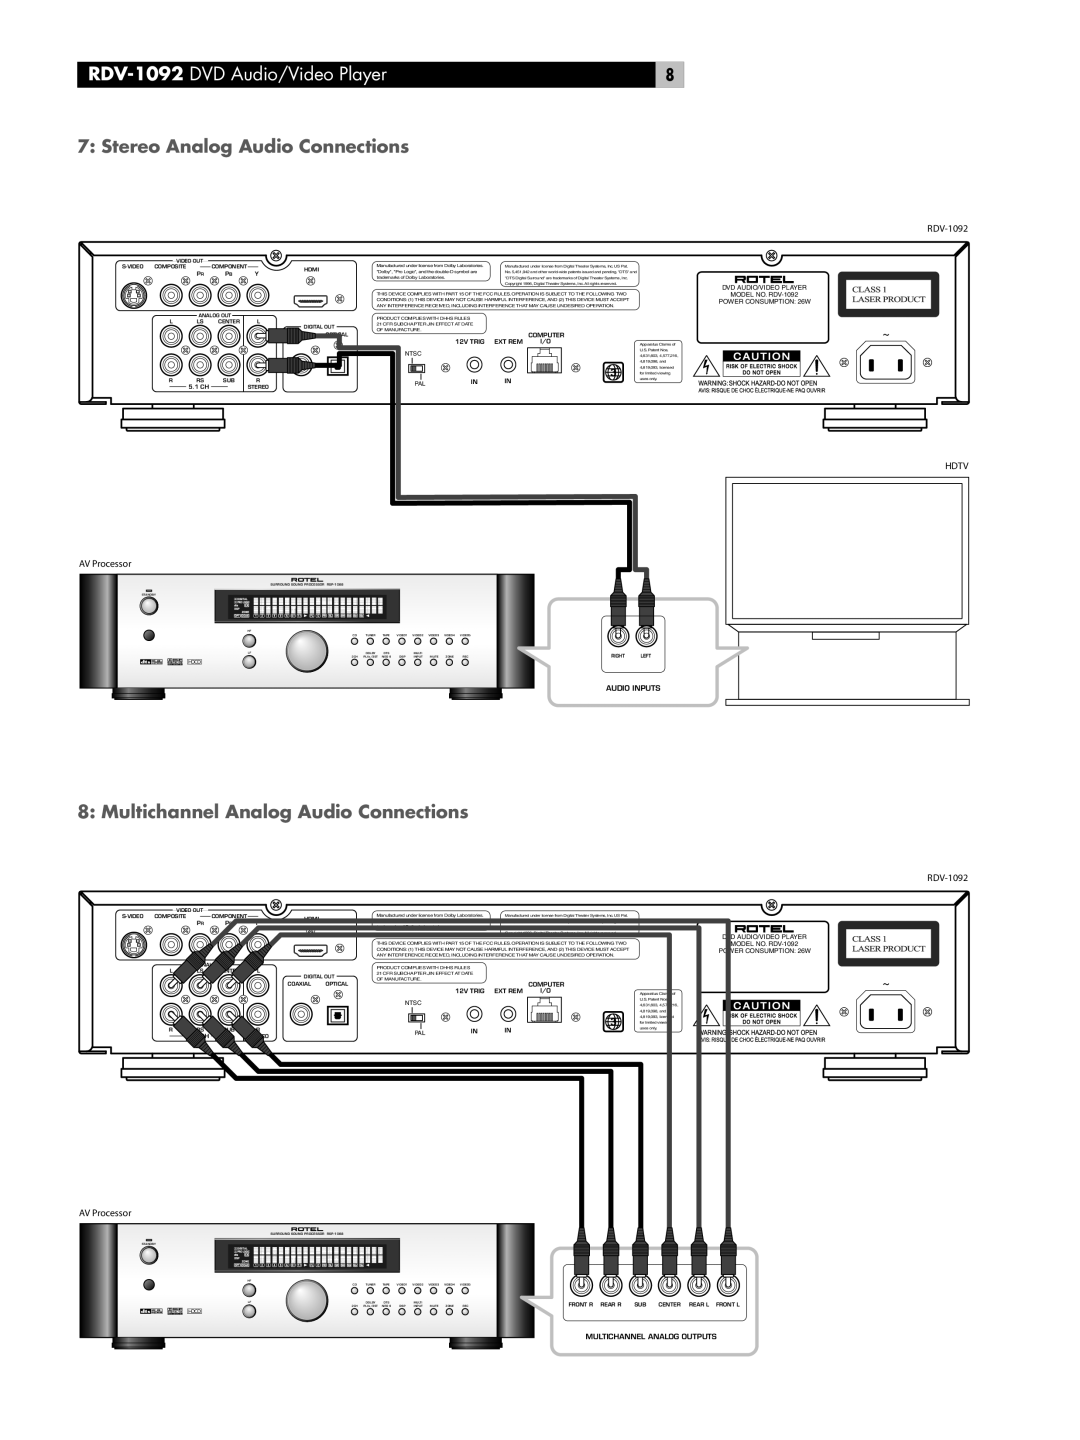 Rotel Stereo Analog Audio Connections, Multichannel Analog Audio Connections, RDV-1092 DVD Audio/Video Player 